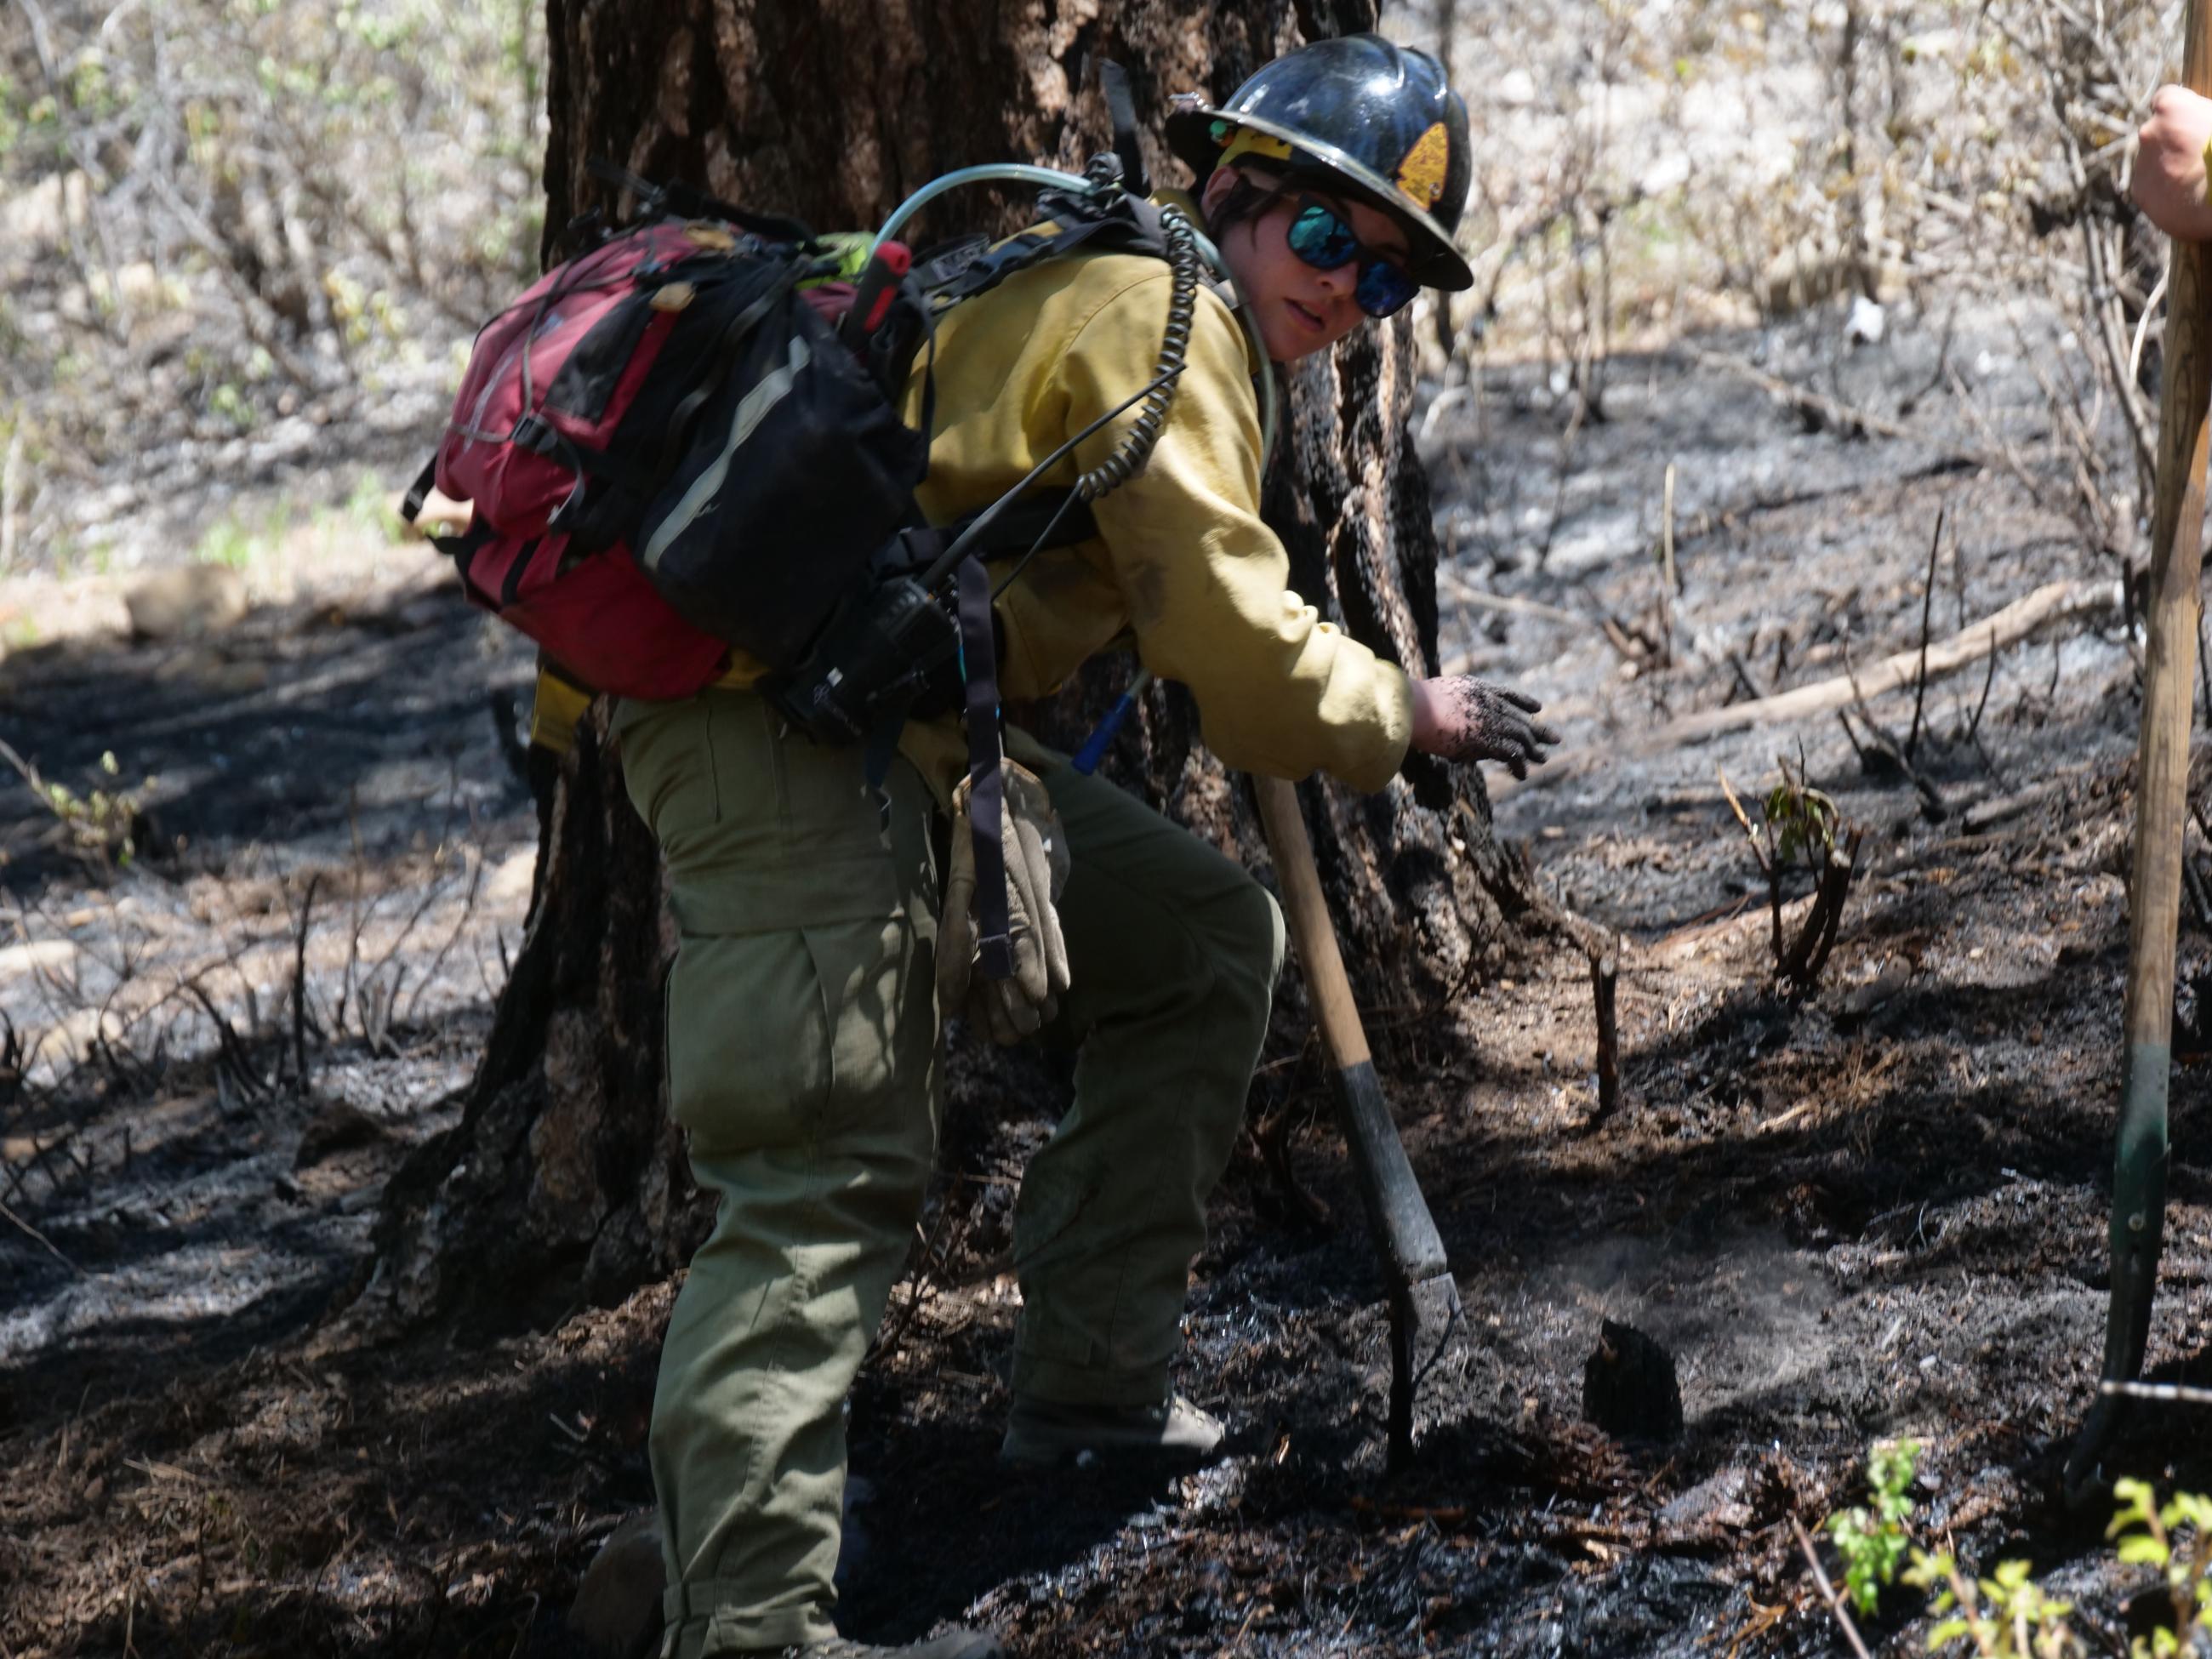 A firefighter is shown "mopping up" during a prescribed burn on the San Juan National Forest.